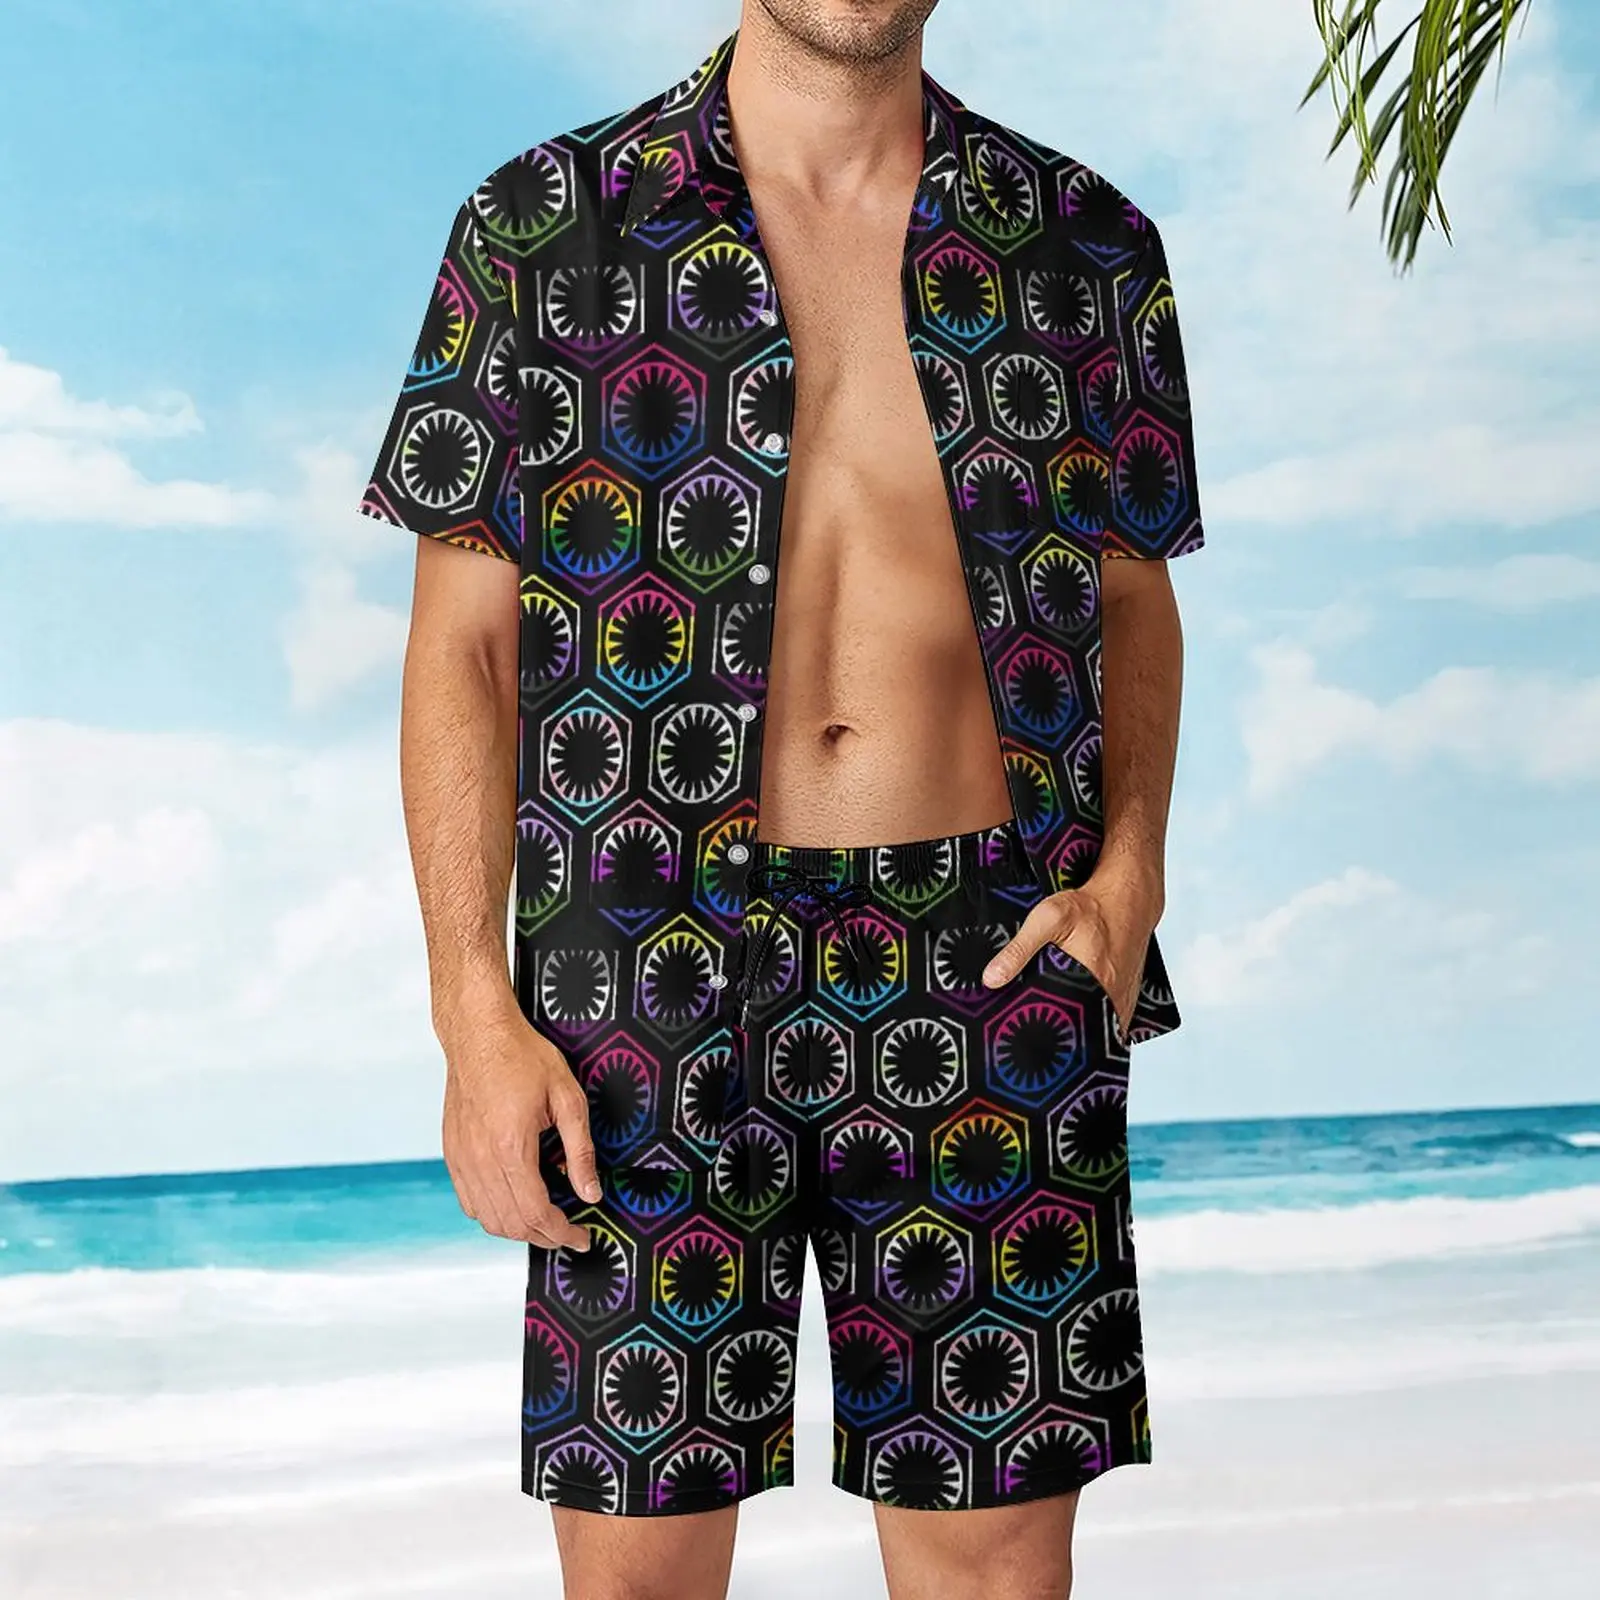 

2 Pieces Coordinates LGBT First Order Hive (Repeating Black) High Grade Men's Beach Suit Creative Going Out USA Size